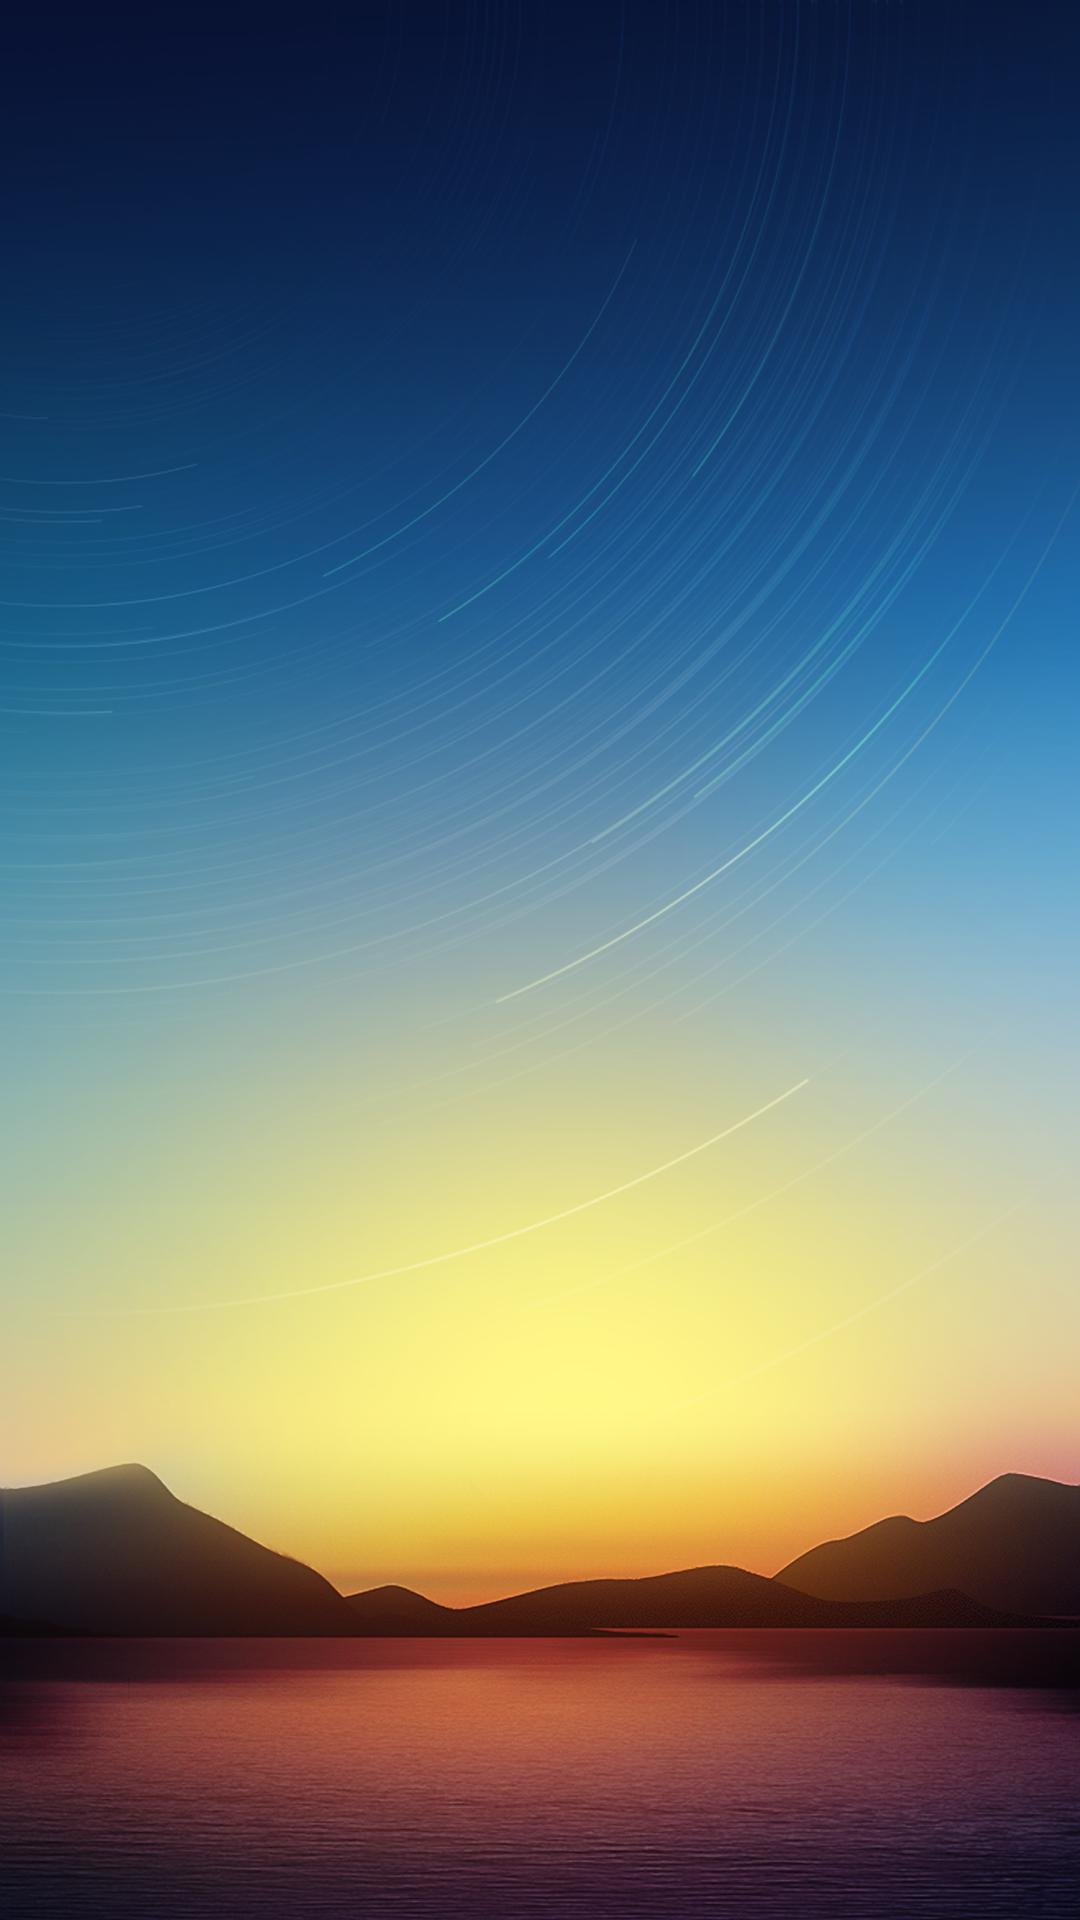 Upgrade Your Screen Size With These Large Phone Wallpaper